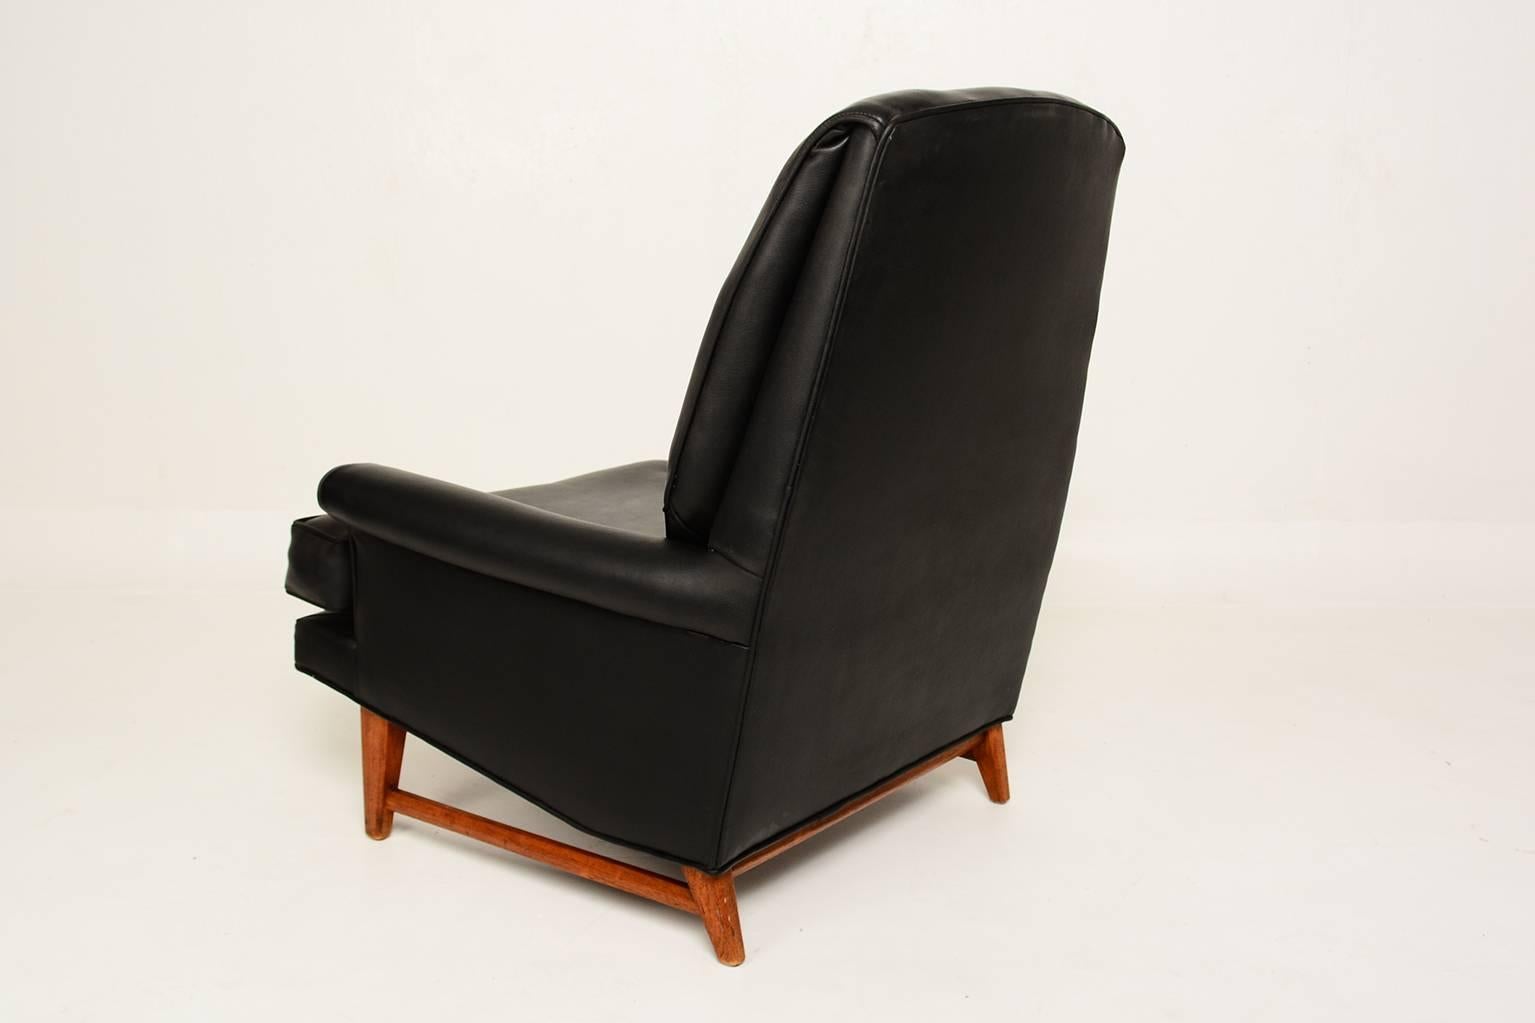 American Mid-Century Modern Arm Chair by Heritage